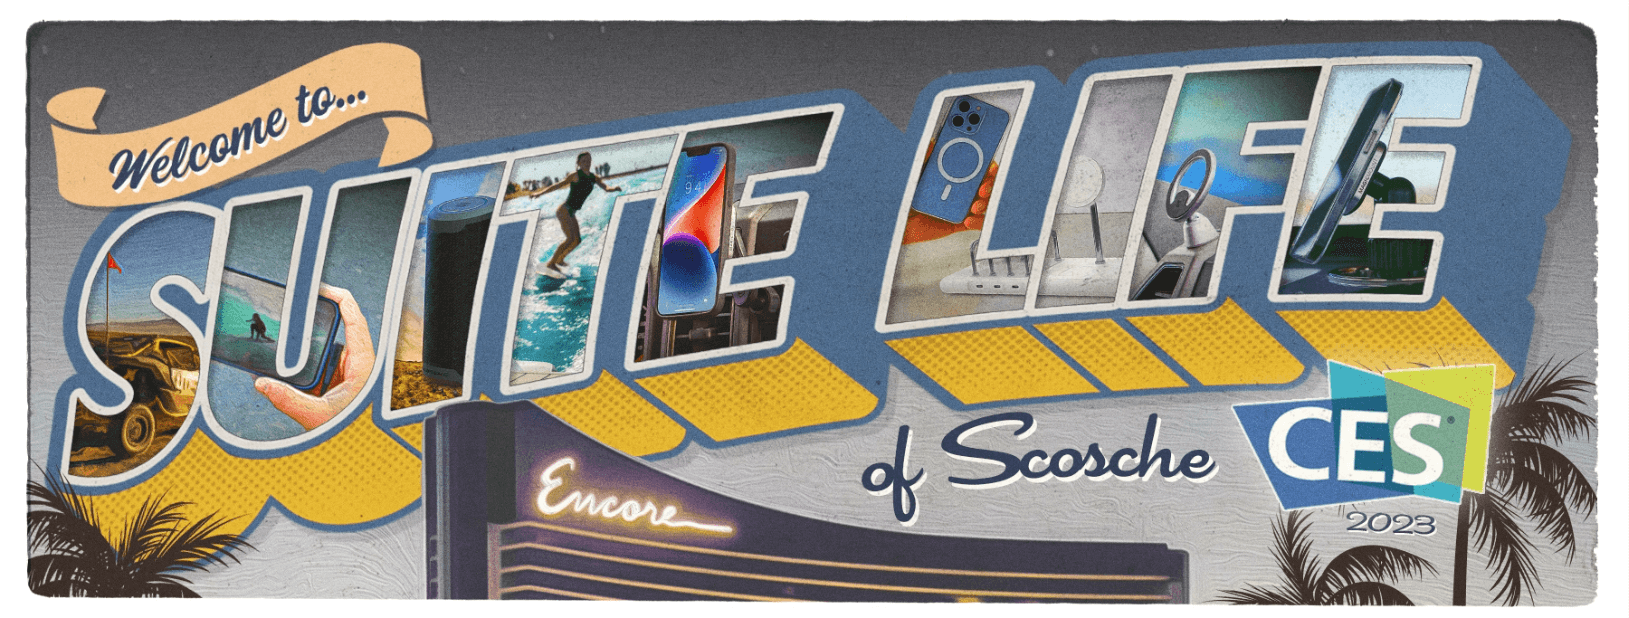 Colorful text that reads: Welcome to ... Suite Life of Scosche CES 2023